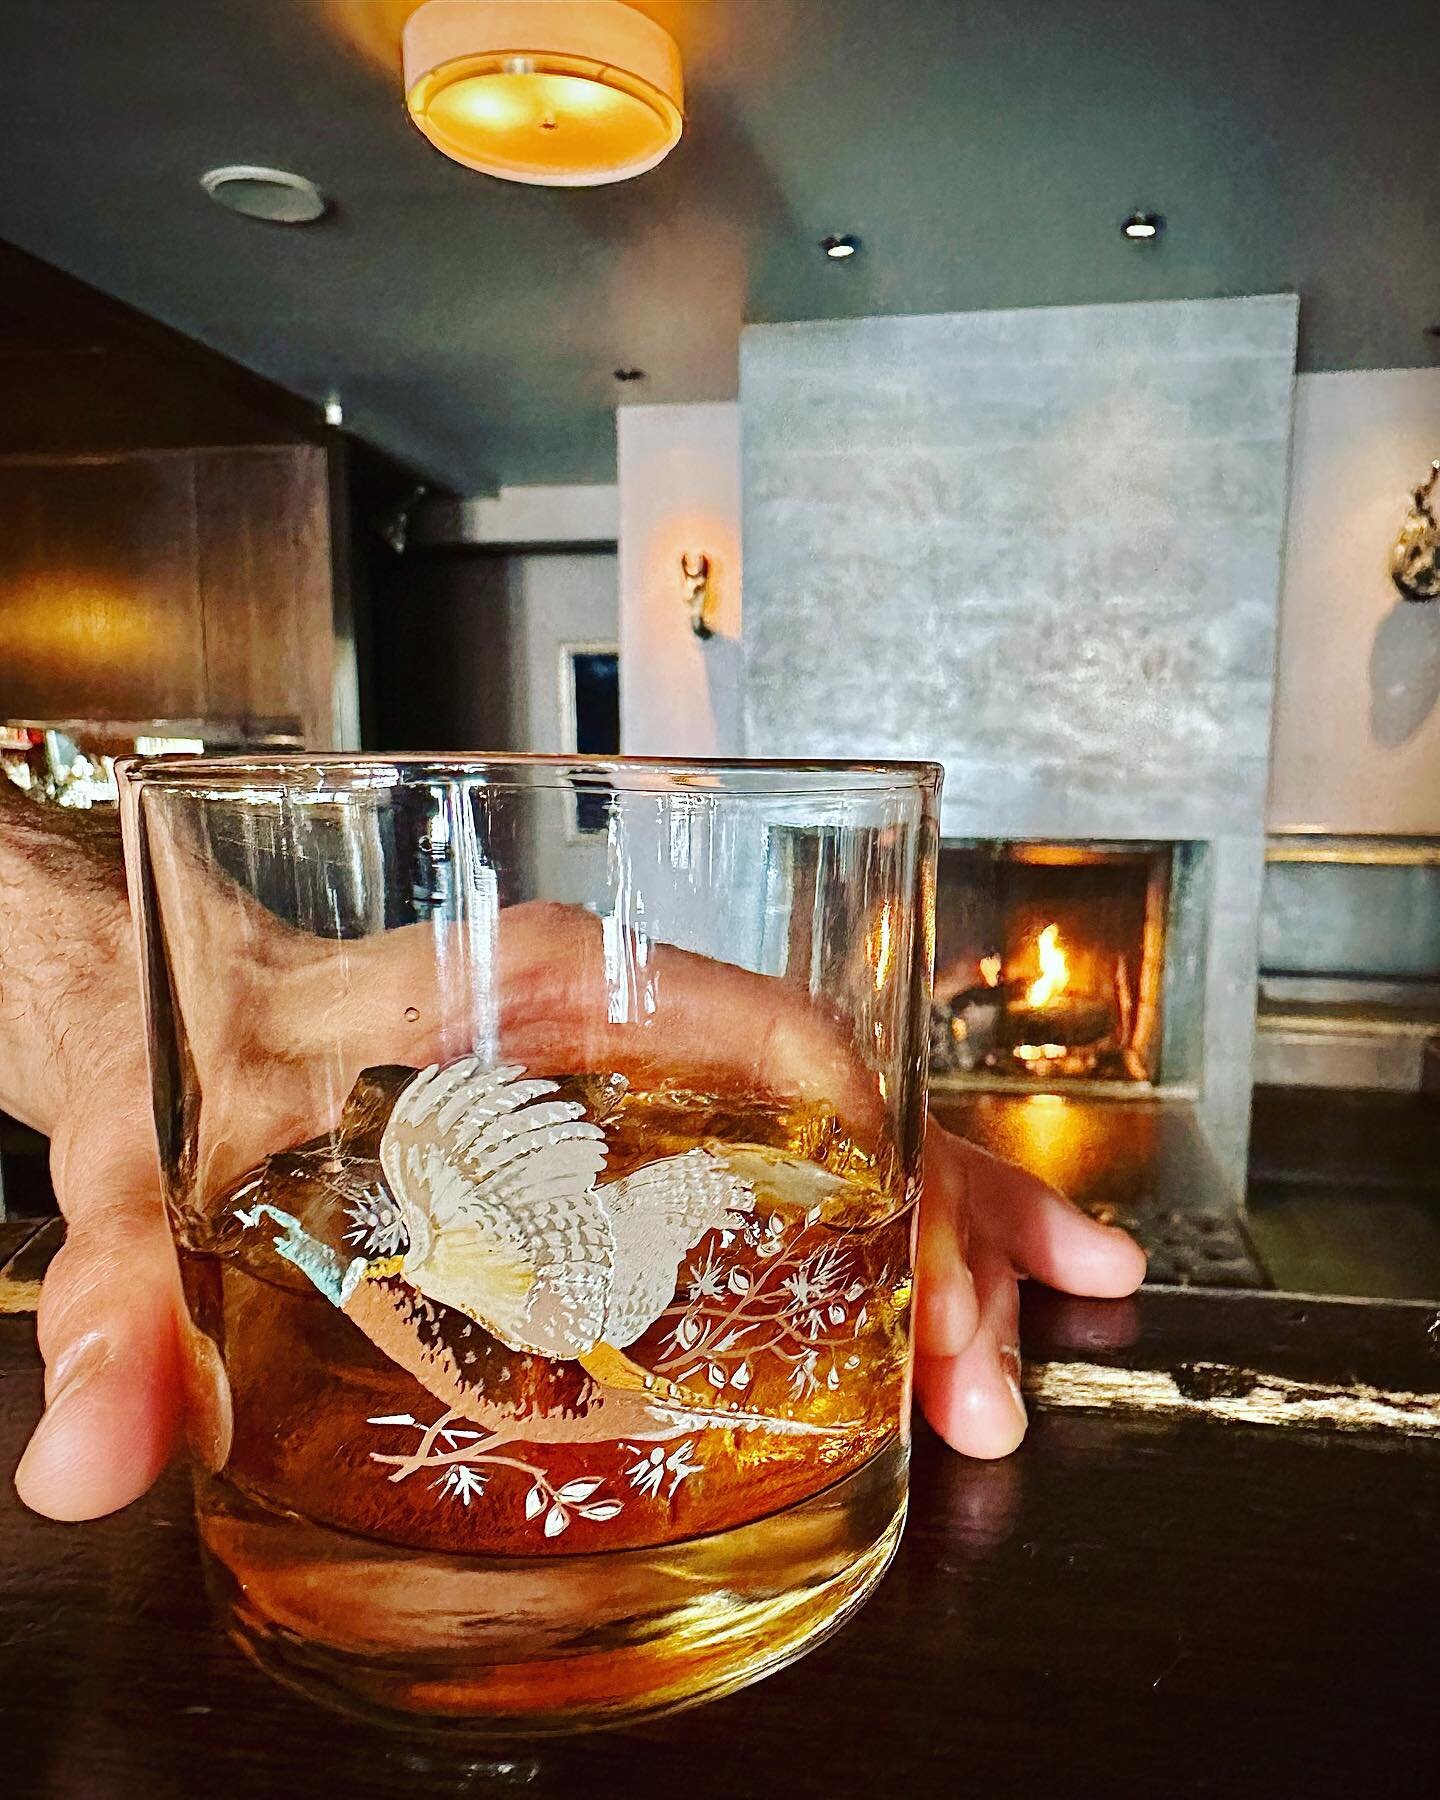 Cheers to the weekend&hellip; and our lovely pheasant&hellip; 

#nobhill #happyhour #zekis #cheers #whisky